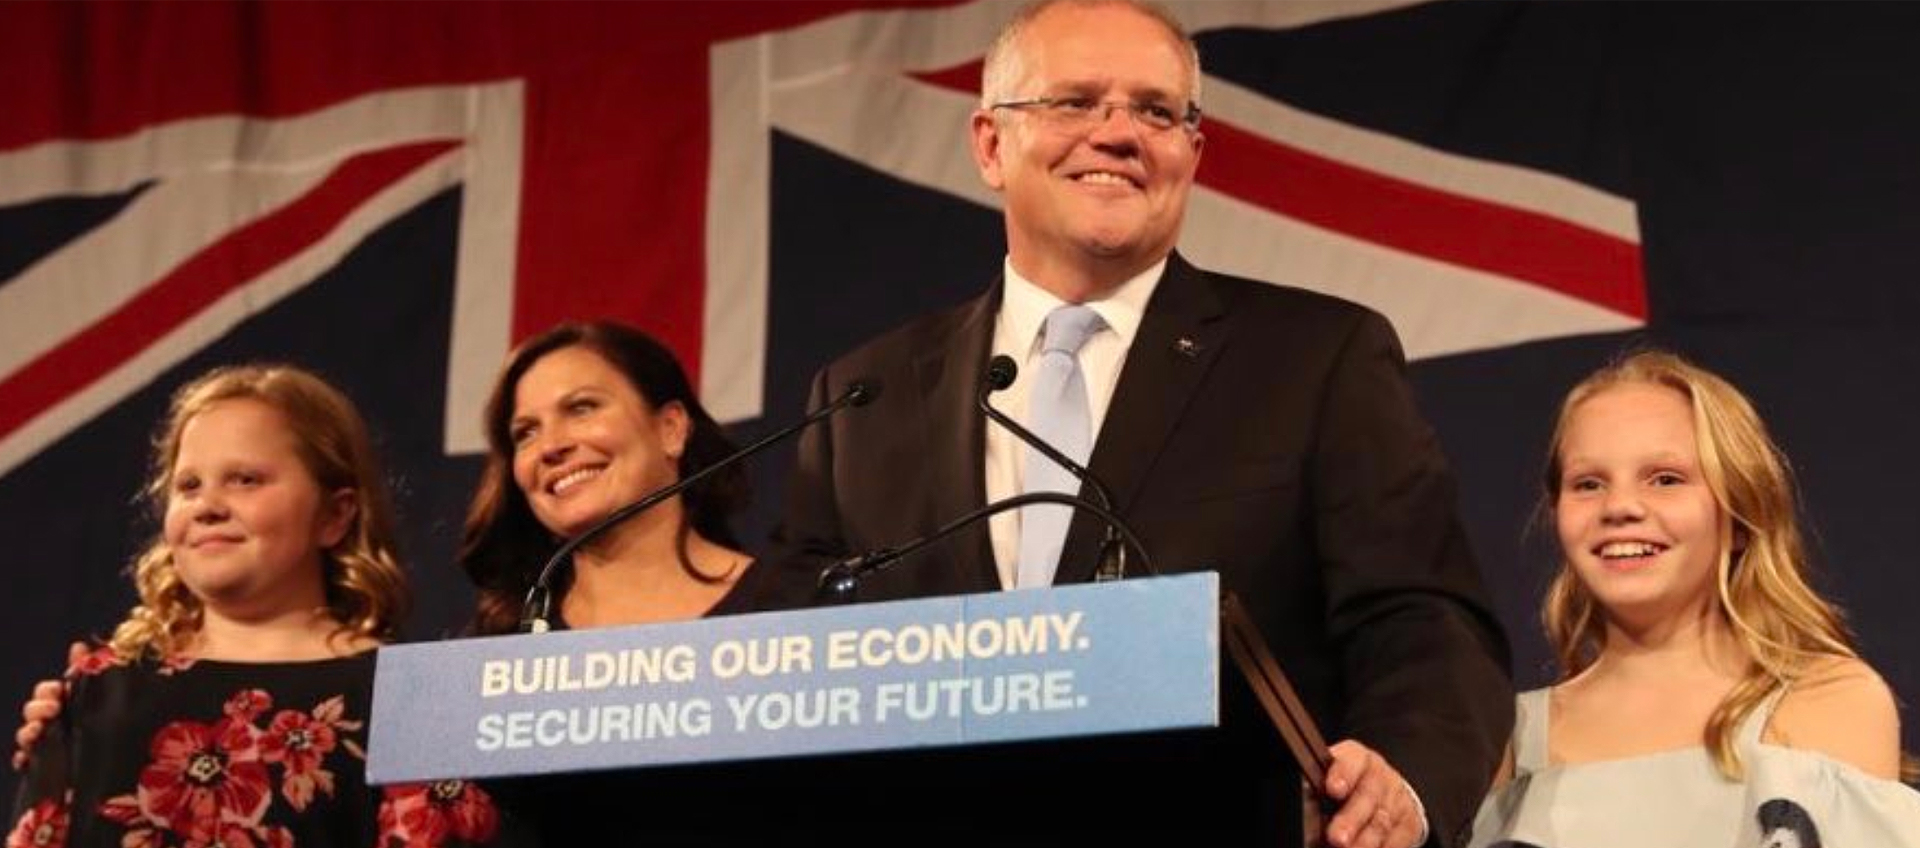 Scott Morrison and his family after he was re-elected as Australian Prime Minister.